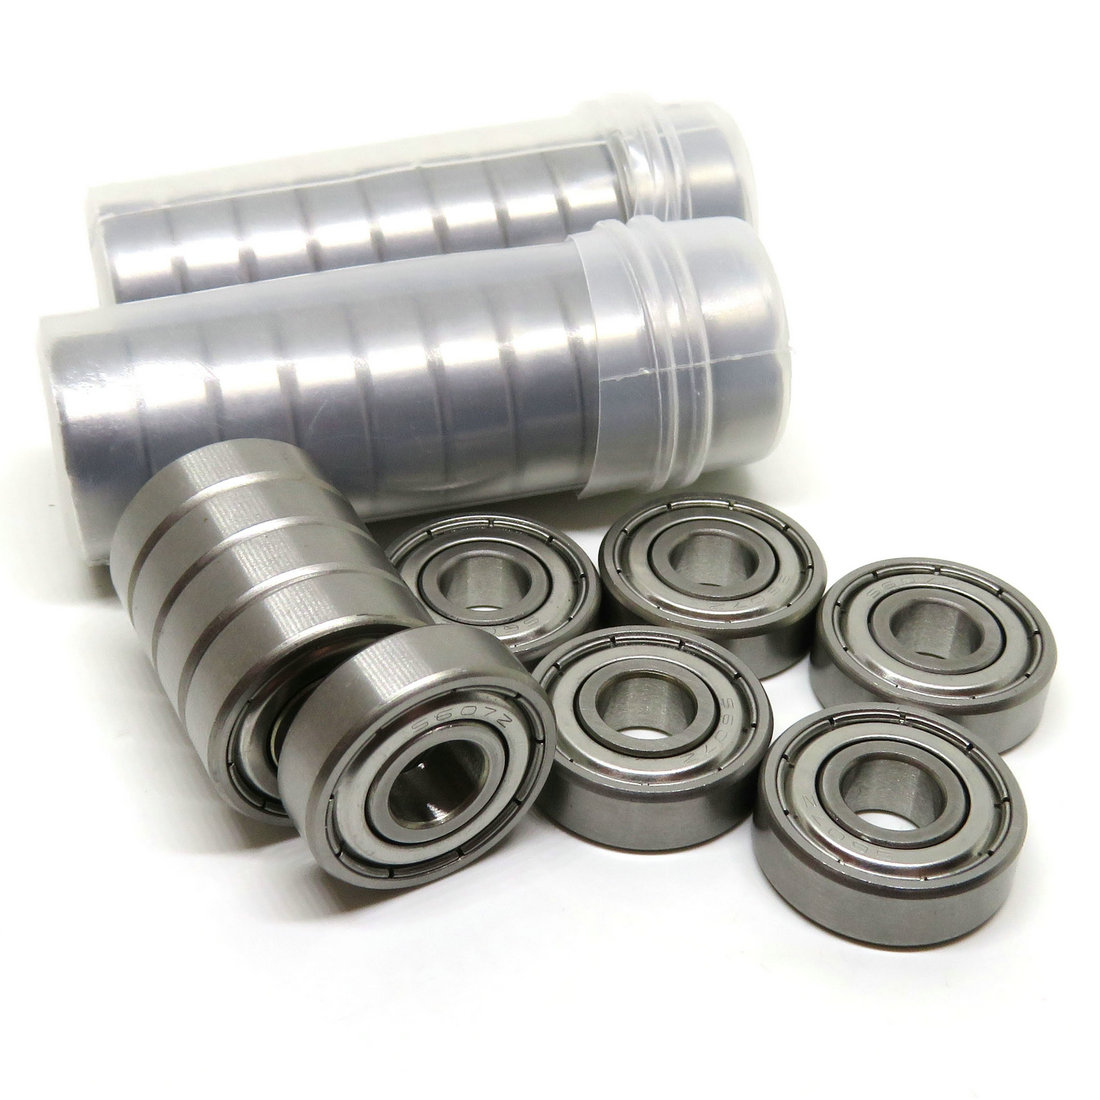 Food Processing S607ZZ Small Stainless Steel Bearings 7mm Bore 7x19x6 Stainless Steel Shielded Ball Bearing.jpg